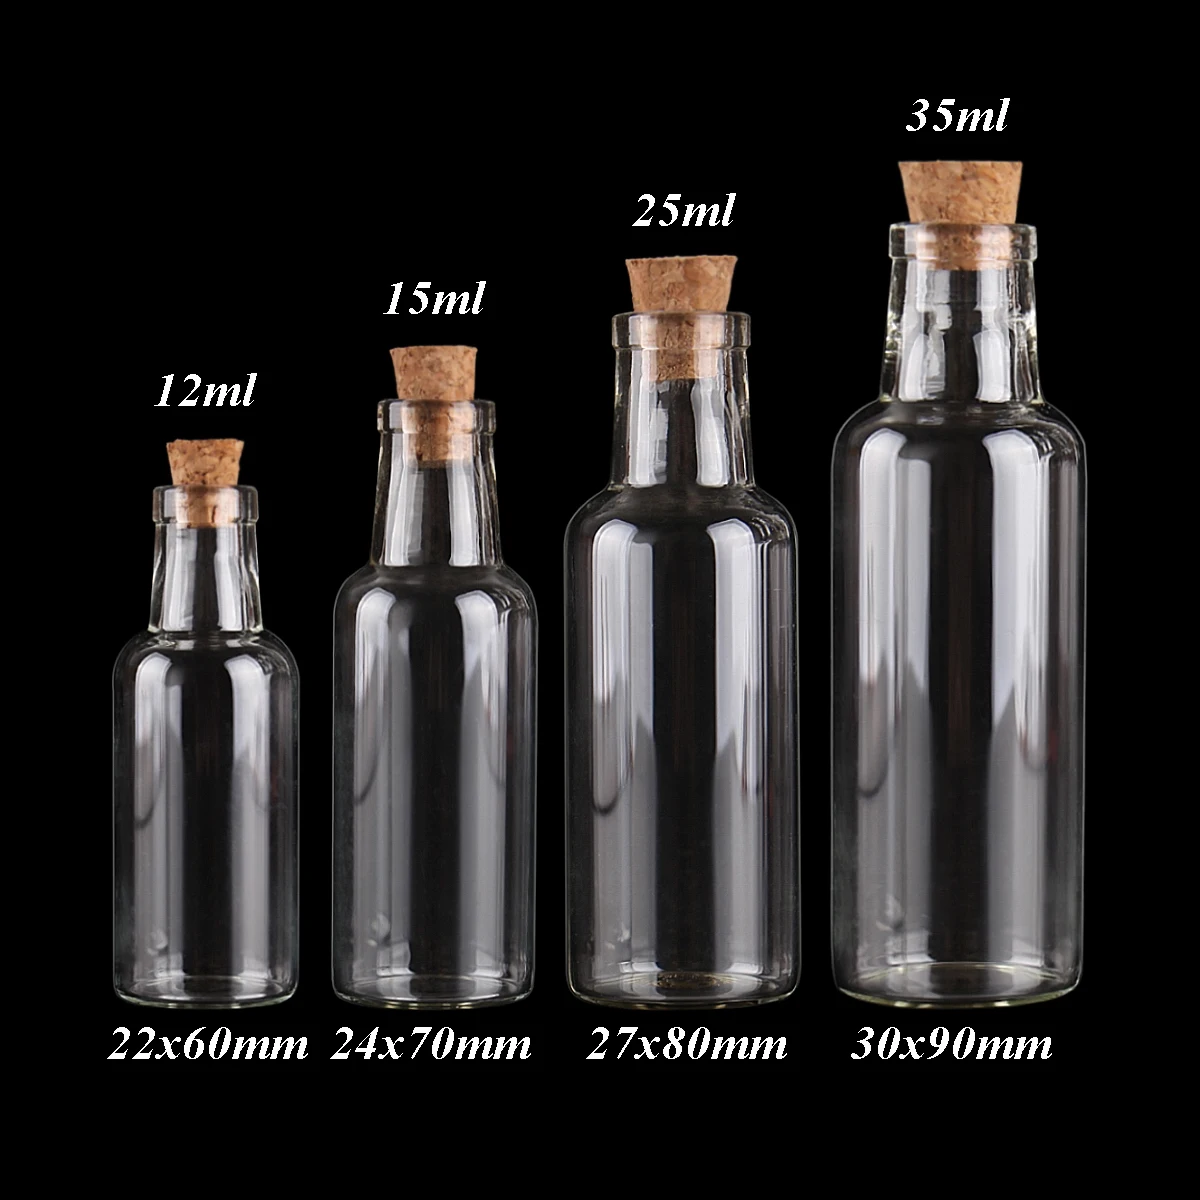 

24pcs 12ml 15ml 25ml 35ml Small Glass Bottles with Cork Stopper Empty Spice Wish Bottles Jars Gift Crafts Vials